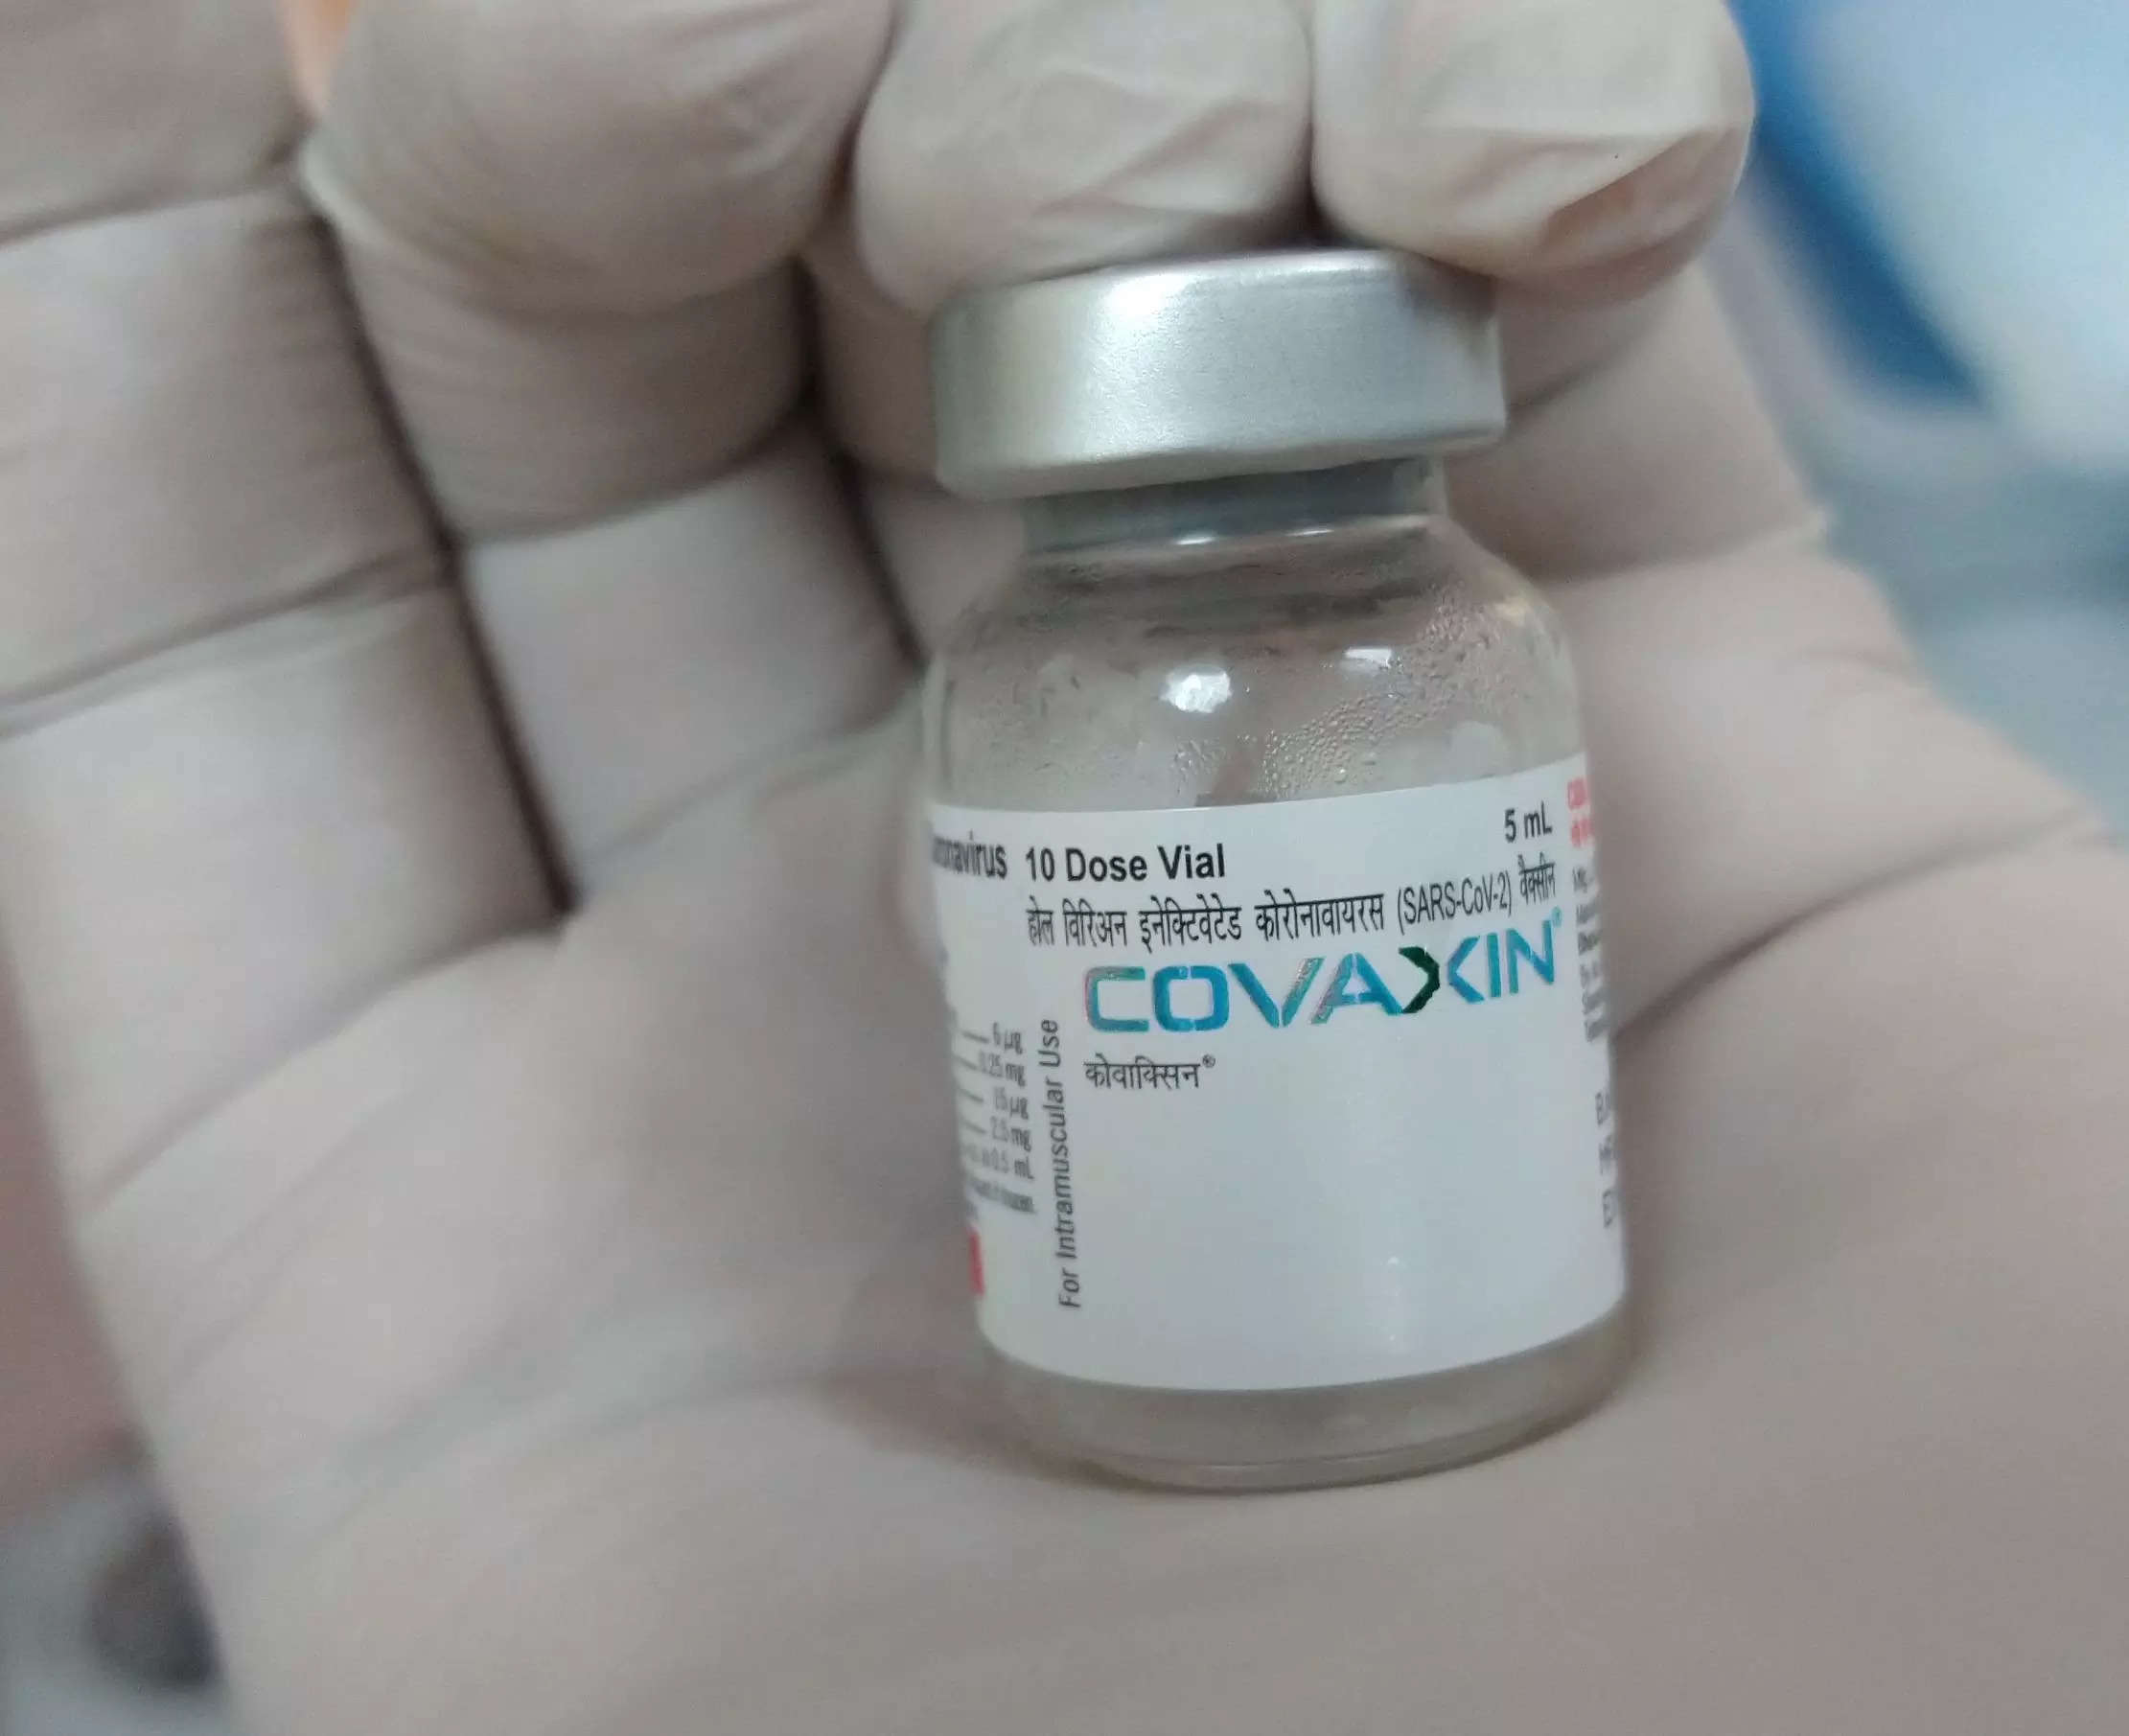 Covaxin demonstrated excellent safety record during studies: Bharat Biotech 